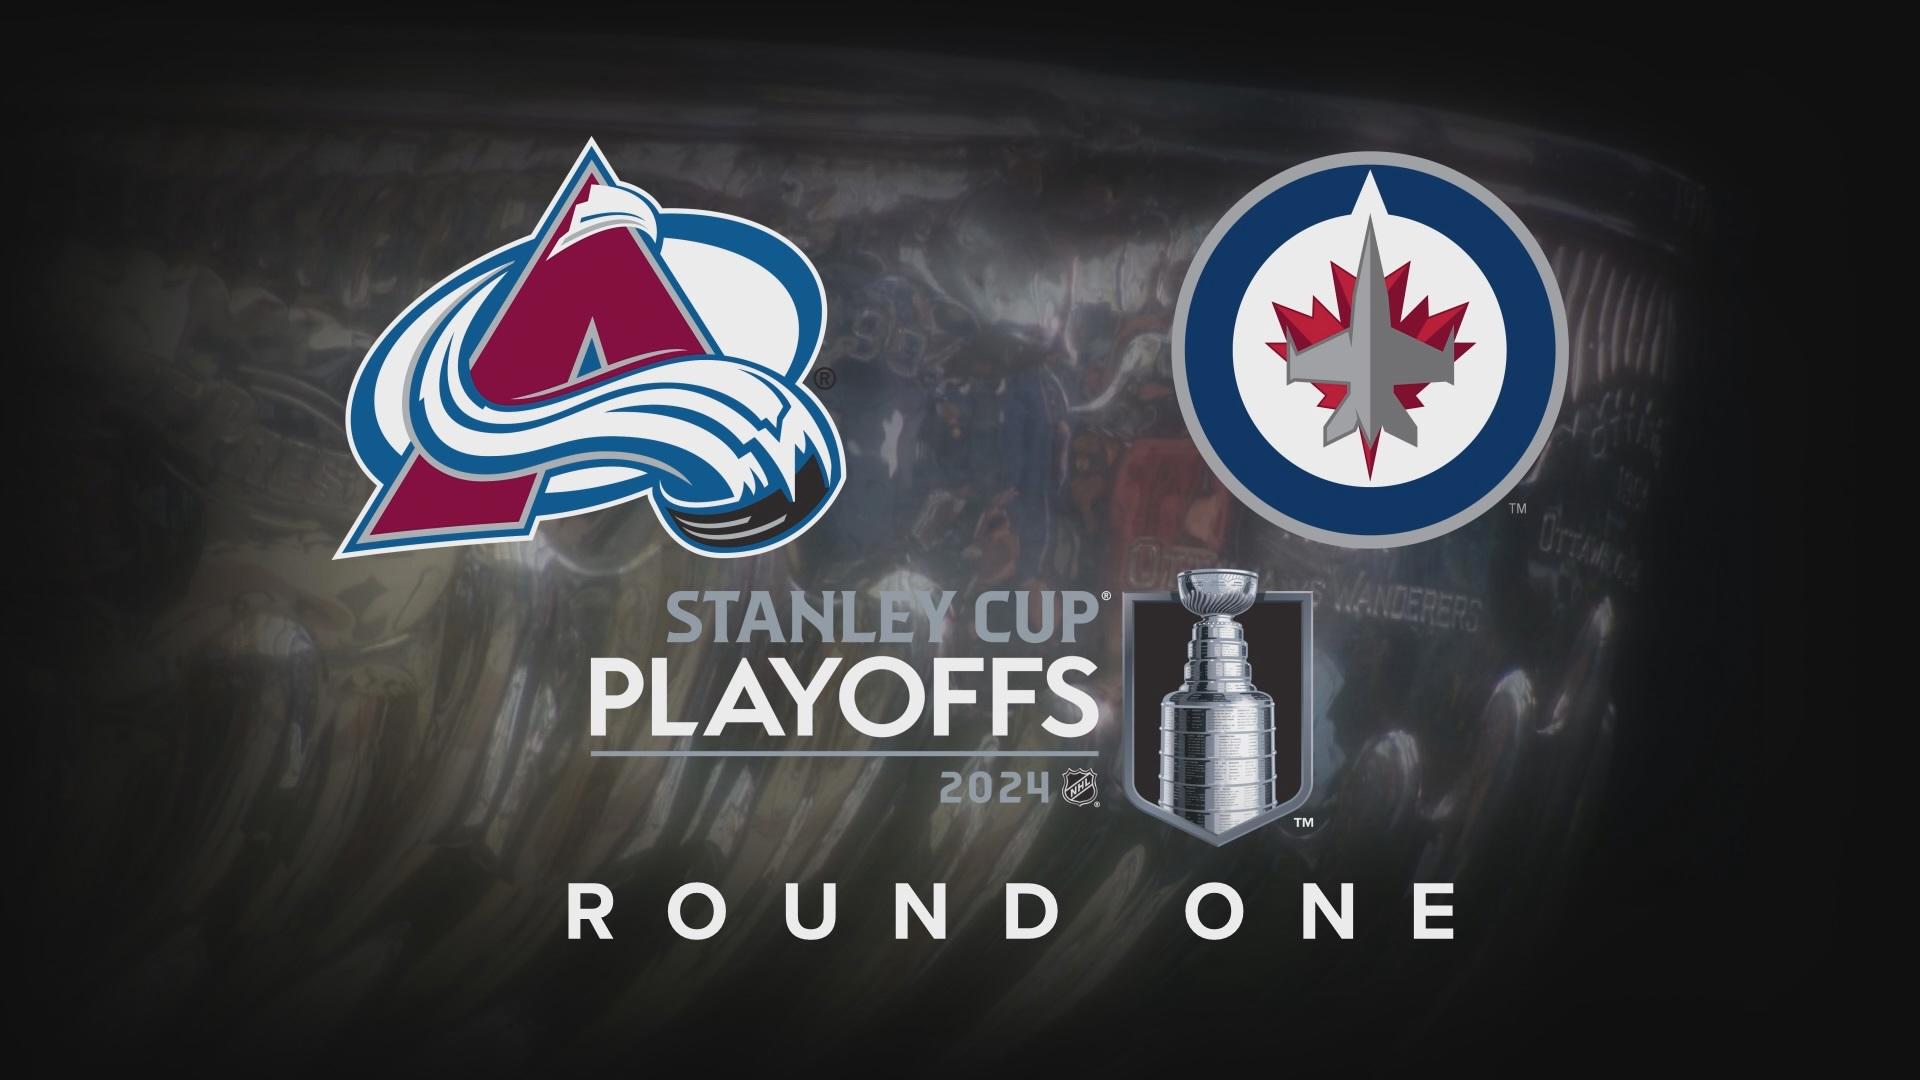 Colorado and Winnipeg come into the third matchup of their opening-round series tied at one game each.